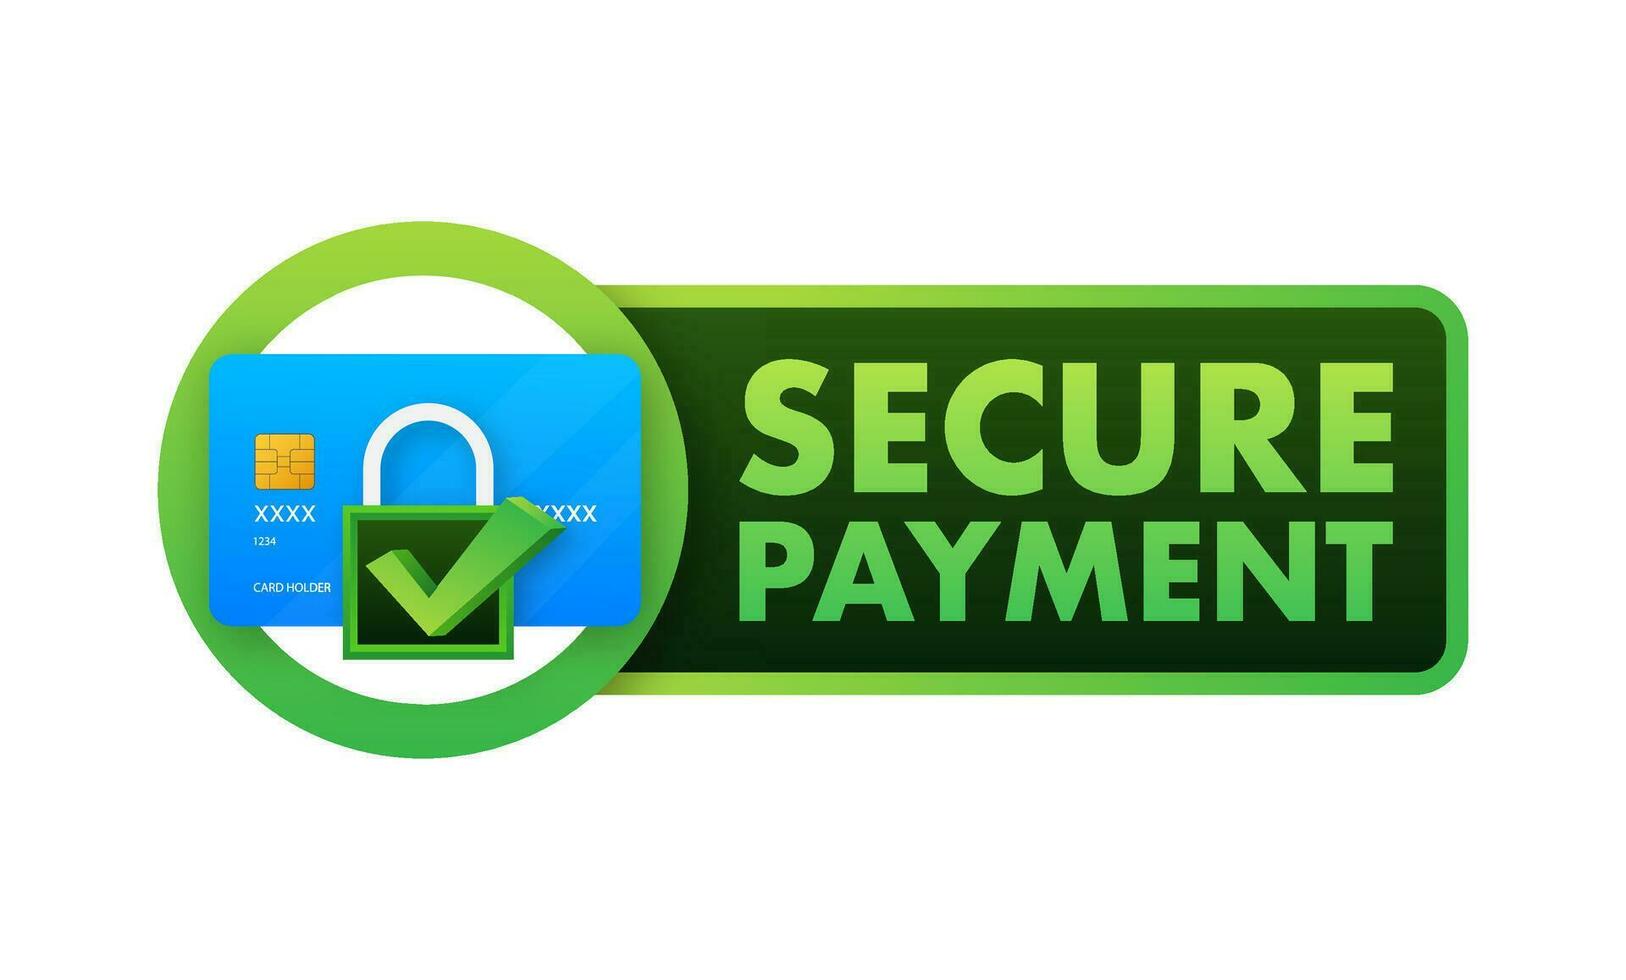 financial regulations, such as the Payment Card Industry Data Security Standard